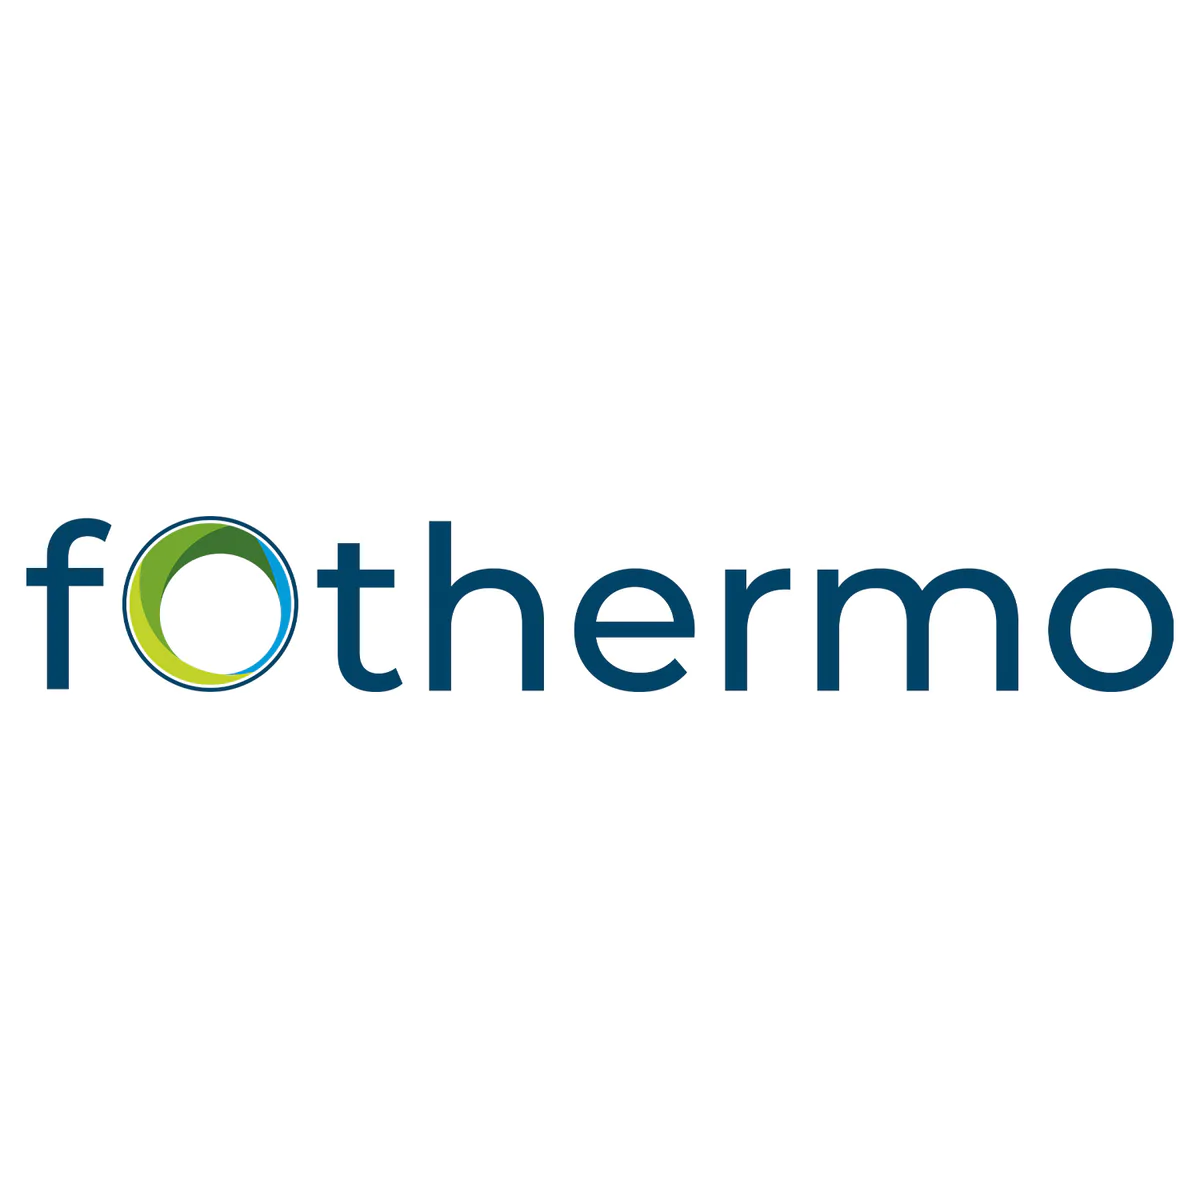 Fothermo